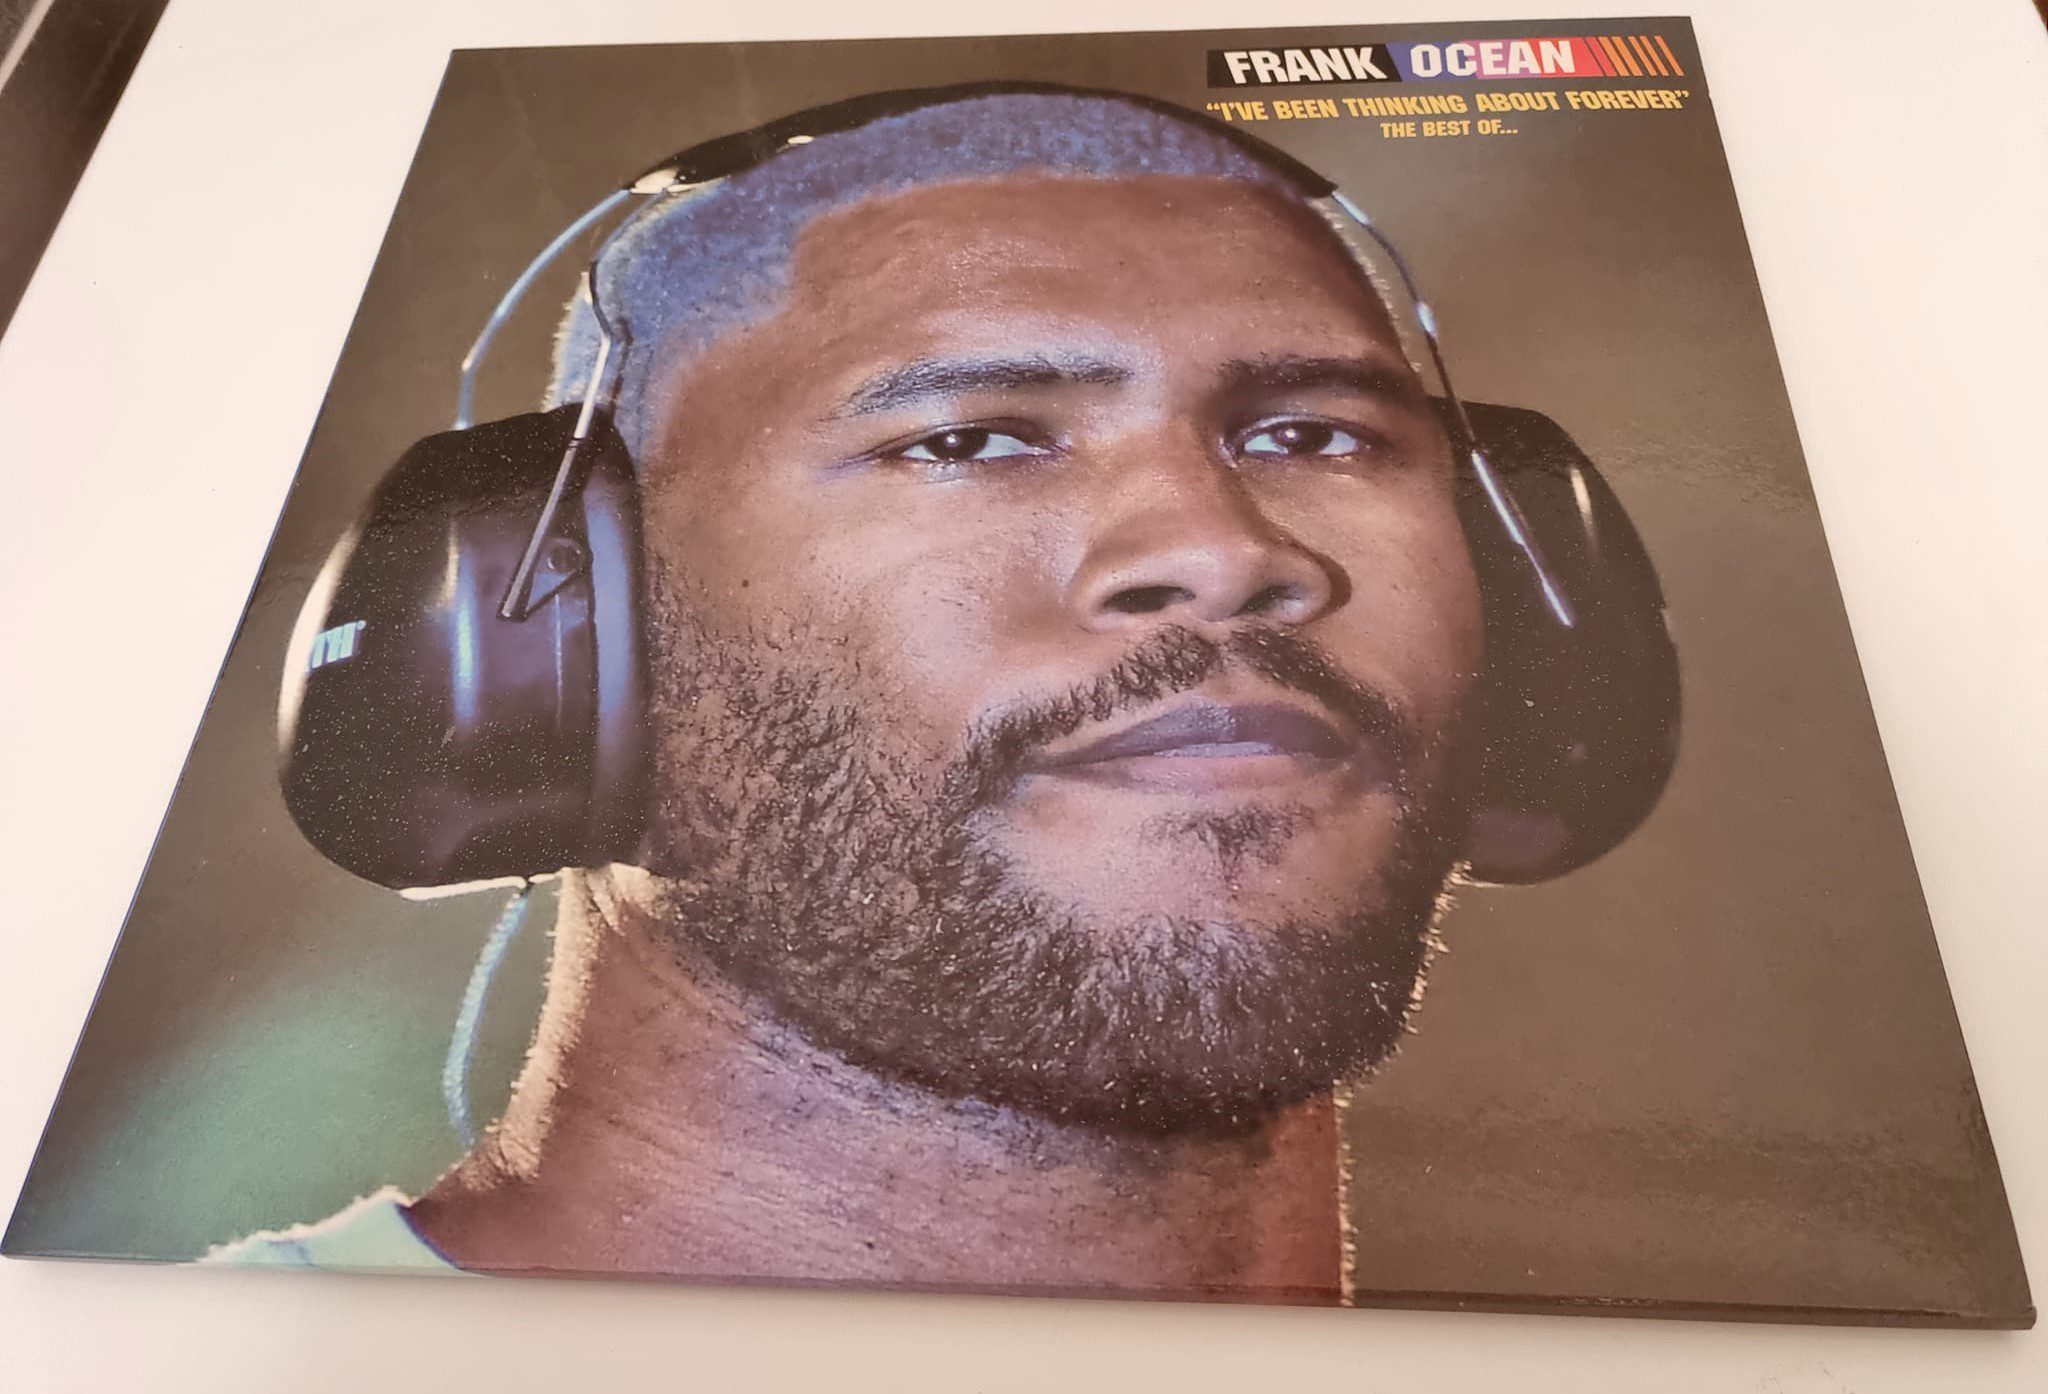 Frank Ocean - I've Been Thinking About Forever (The Best Of) LP